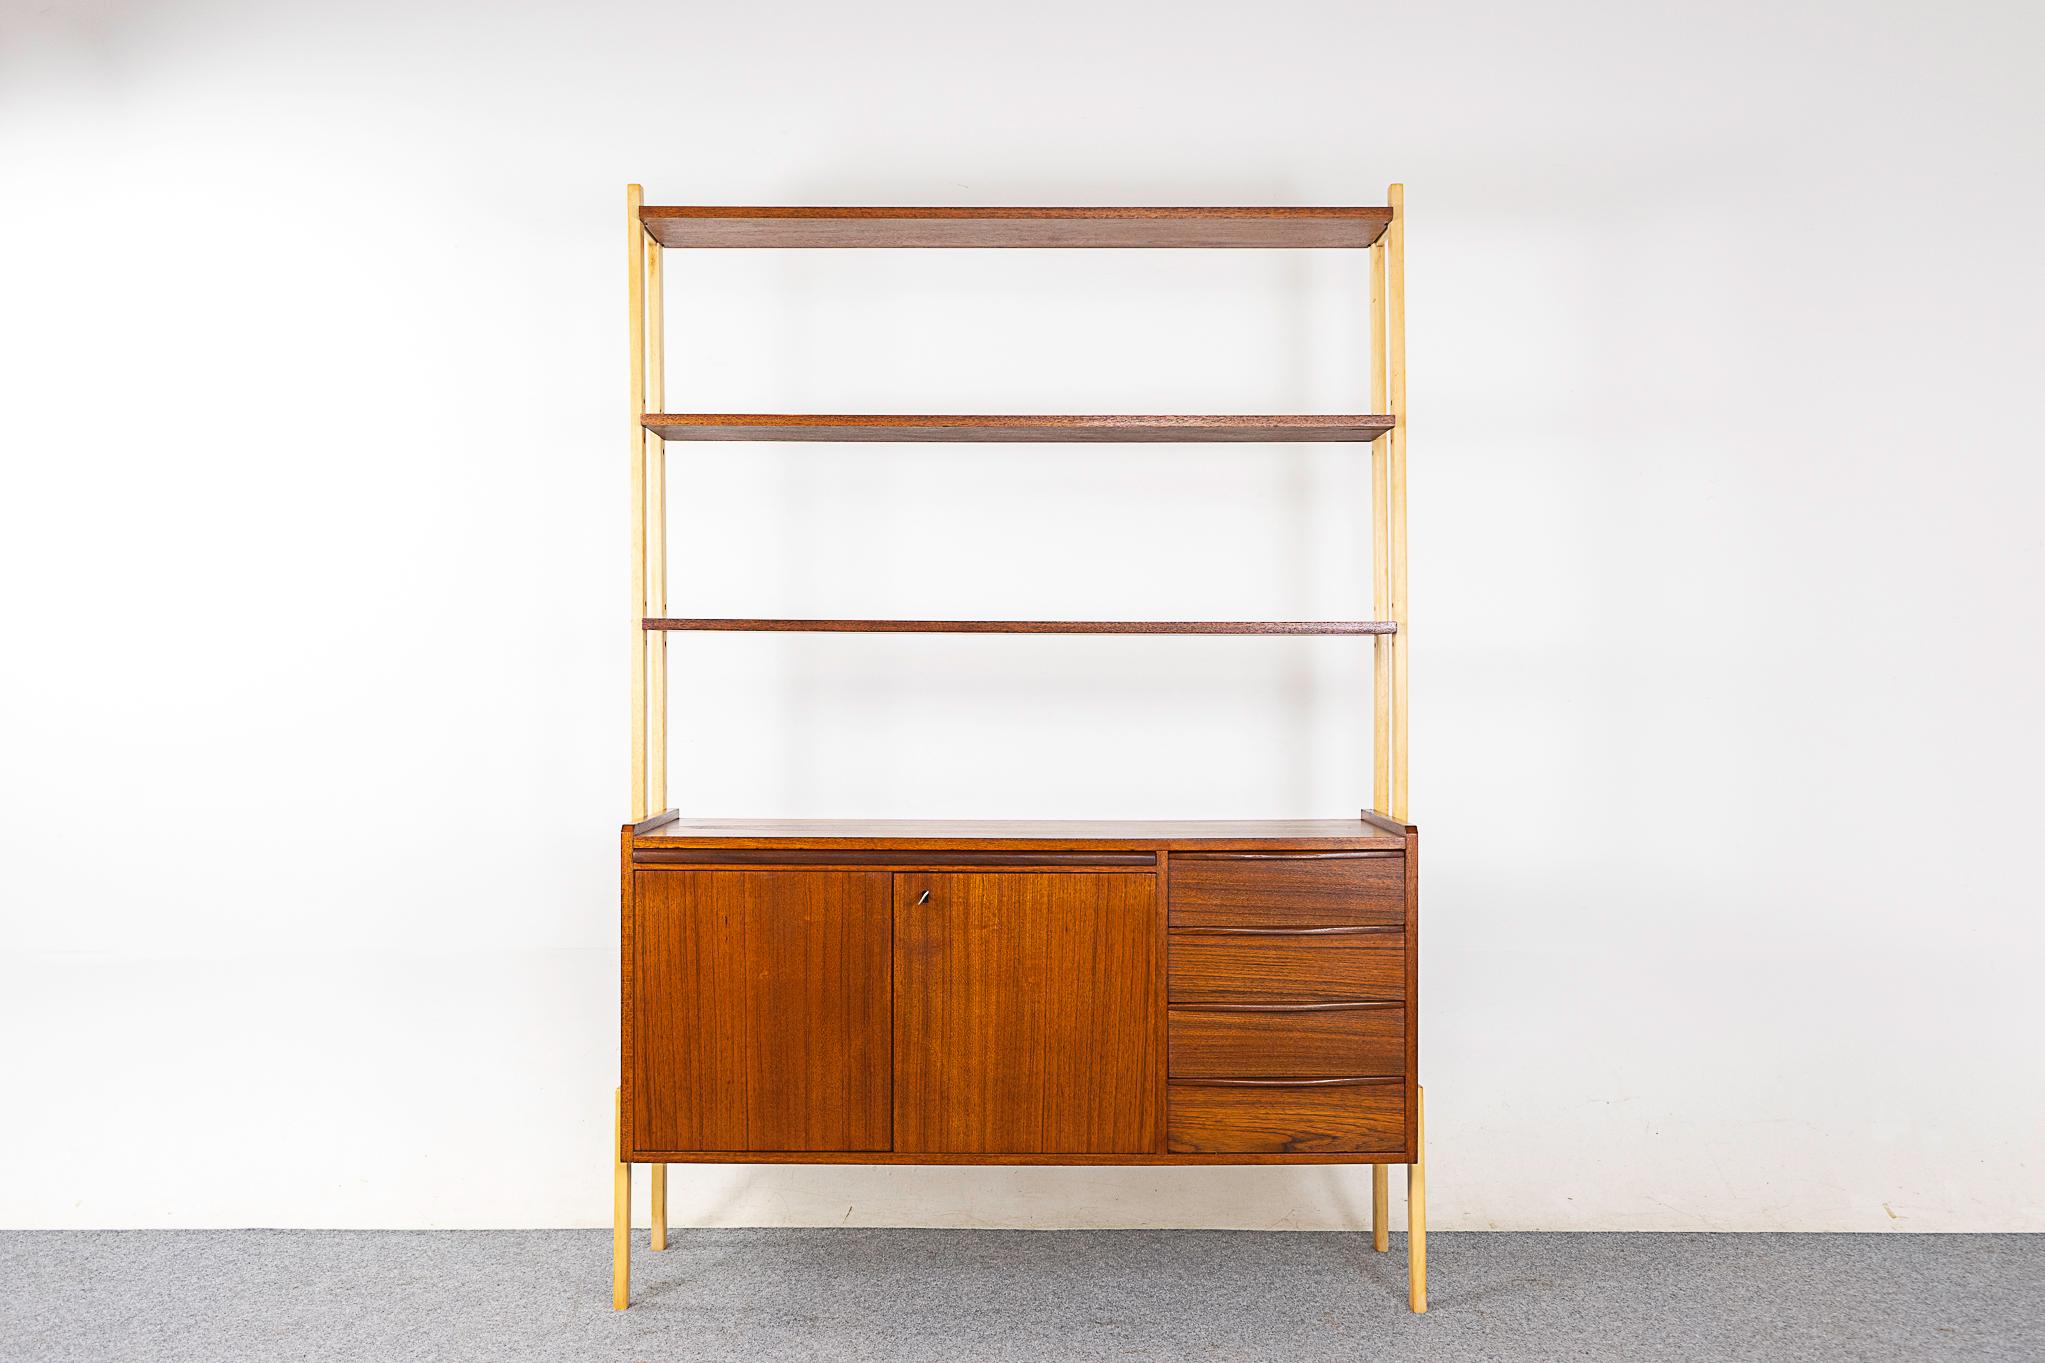 Teak and beech wood Scandinavian bookcase/cabinet, circa 1960's. Highly functional design combines a chest of drawers, slide out desk and open bookshelf! Beautiful contrasting wood types.